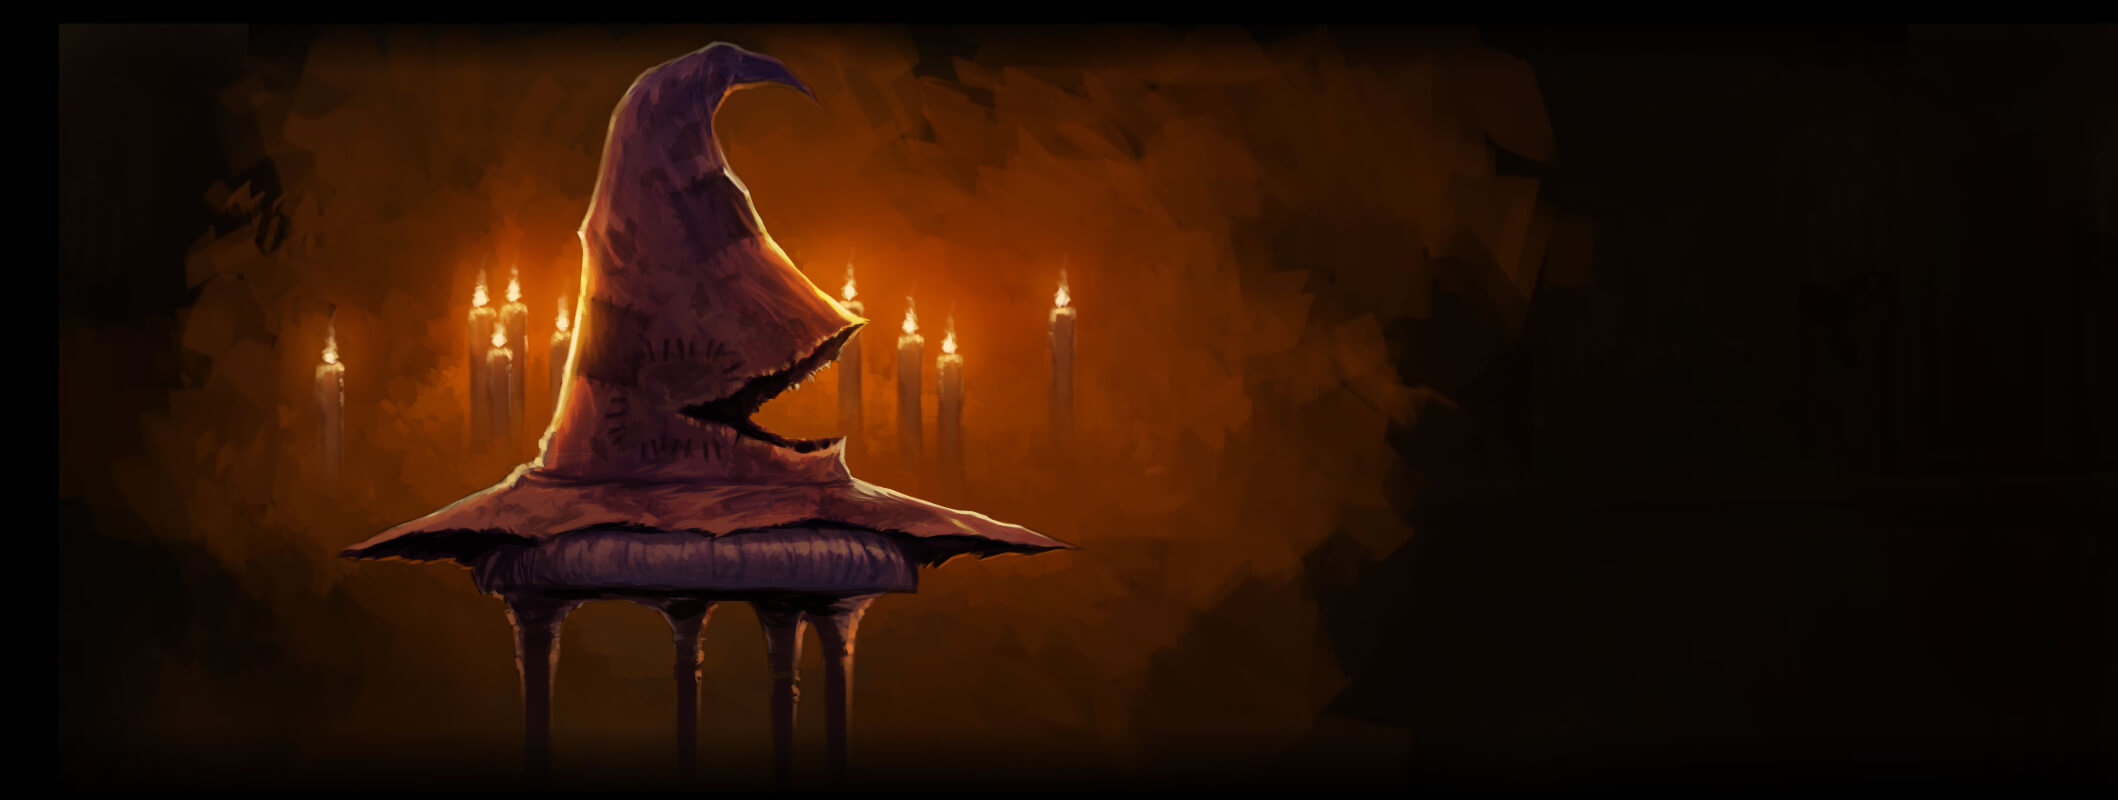 1.07 The Sorting Hat